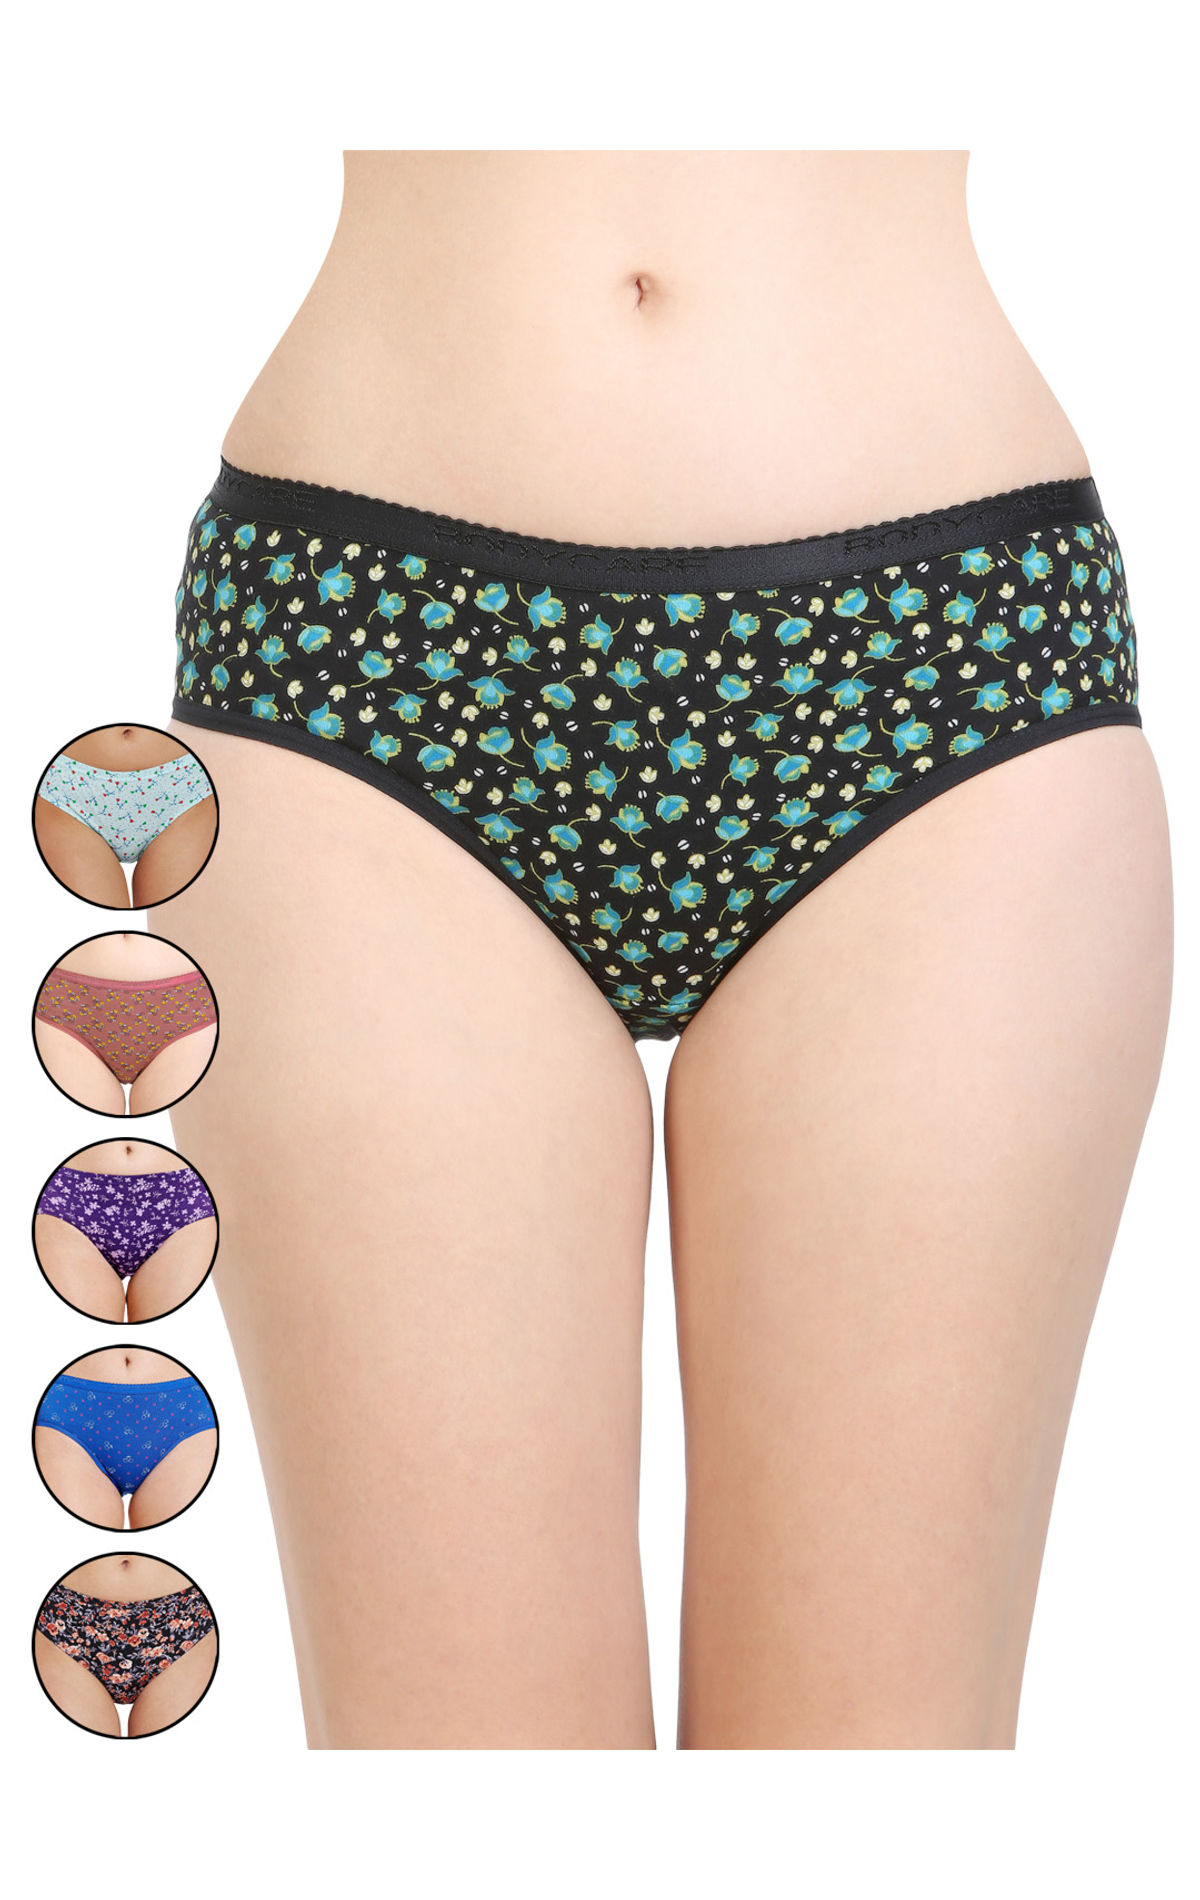 Bodycare Pack Of 6 Printed Hipster Briefs Deluxe Panties In Assorted Color  - E9600-6pcs-b, E9600-6pcs-b